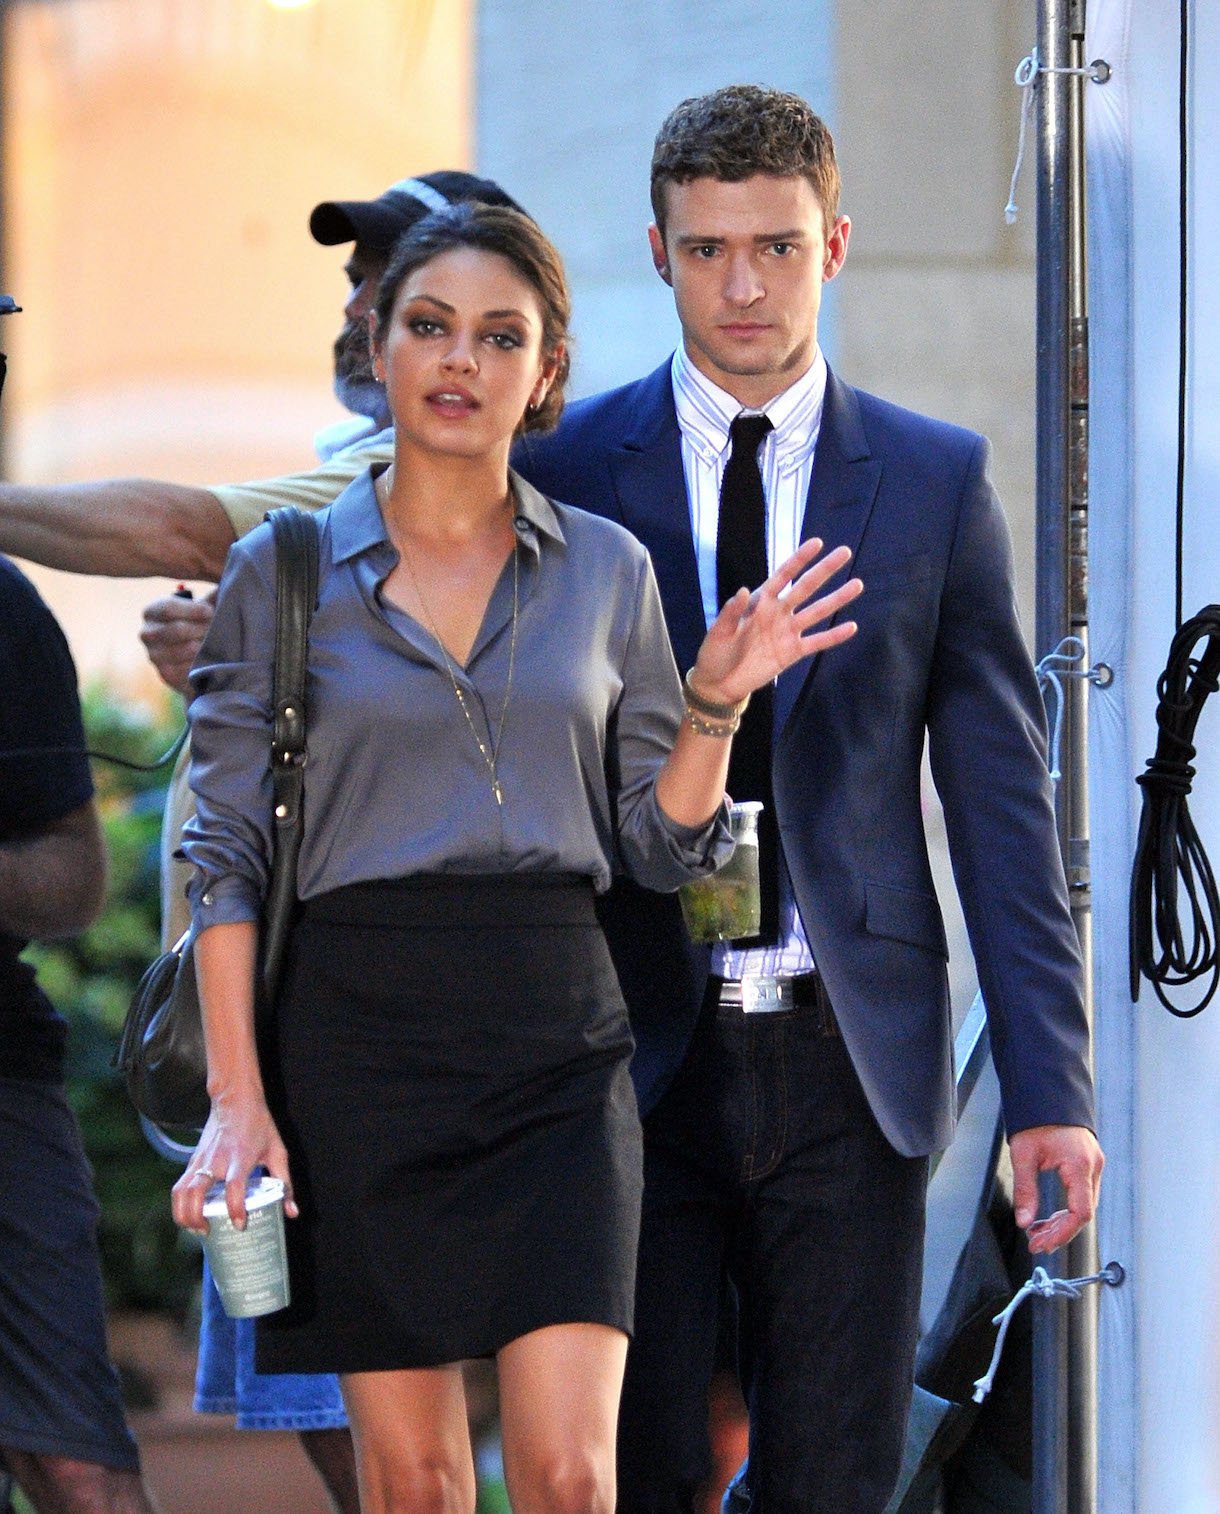 Friends With Benefits': Mila Kunis Fell Asleep During Her Sex Scene With  Justin Timberlake